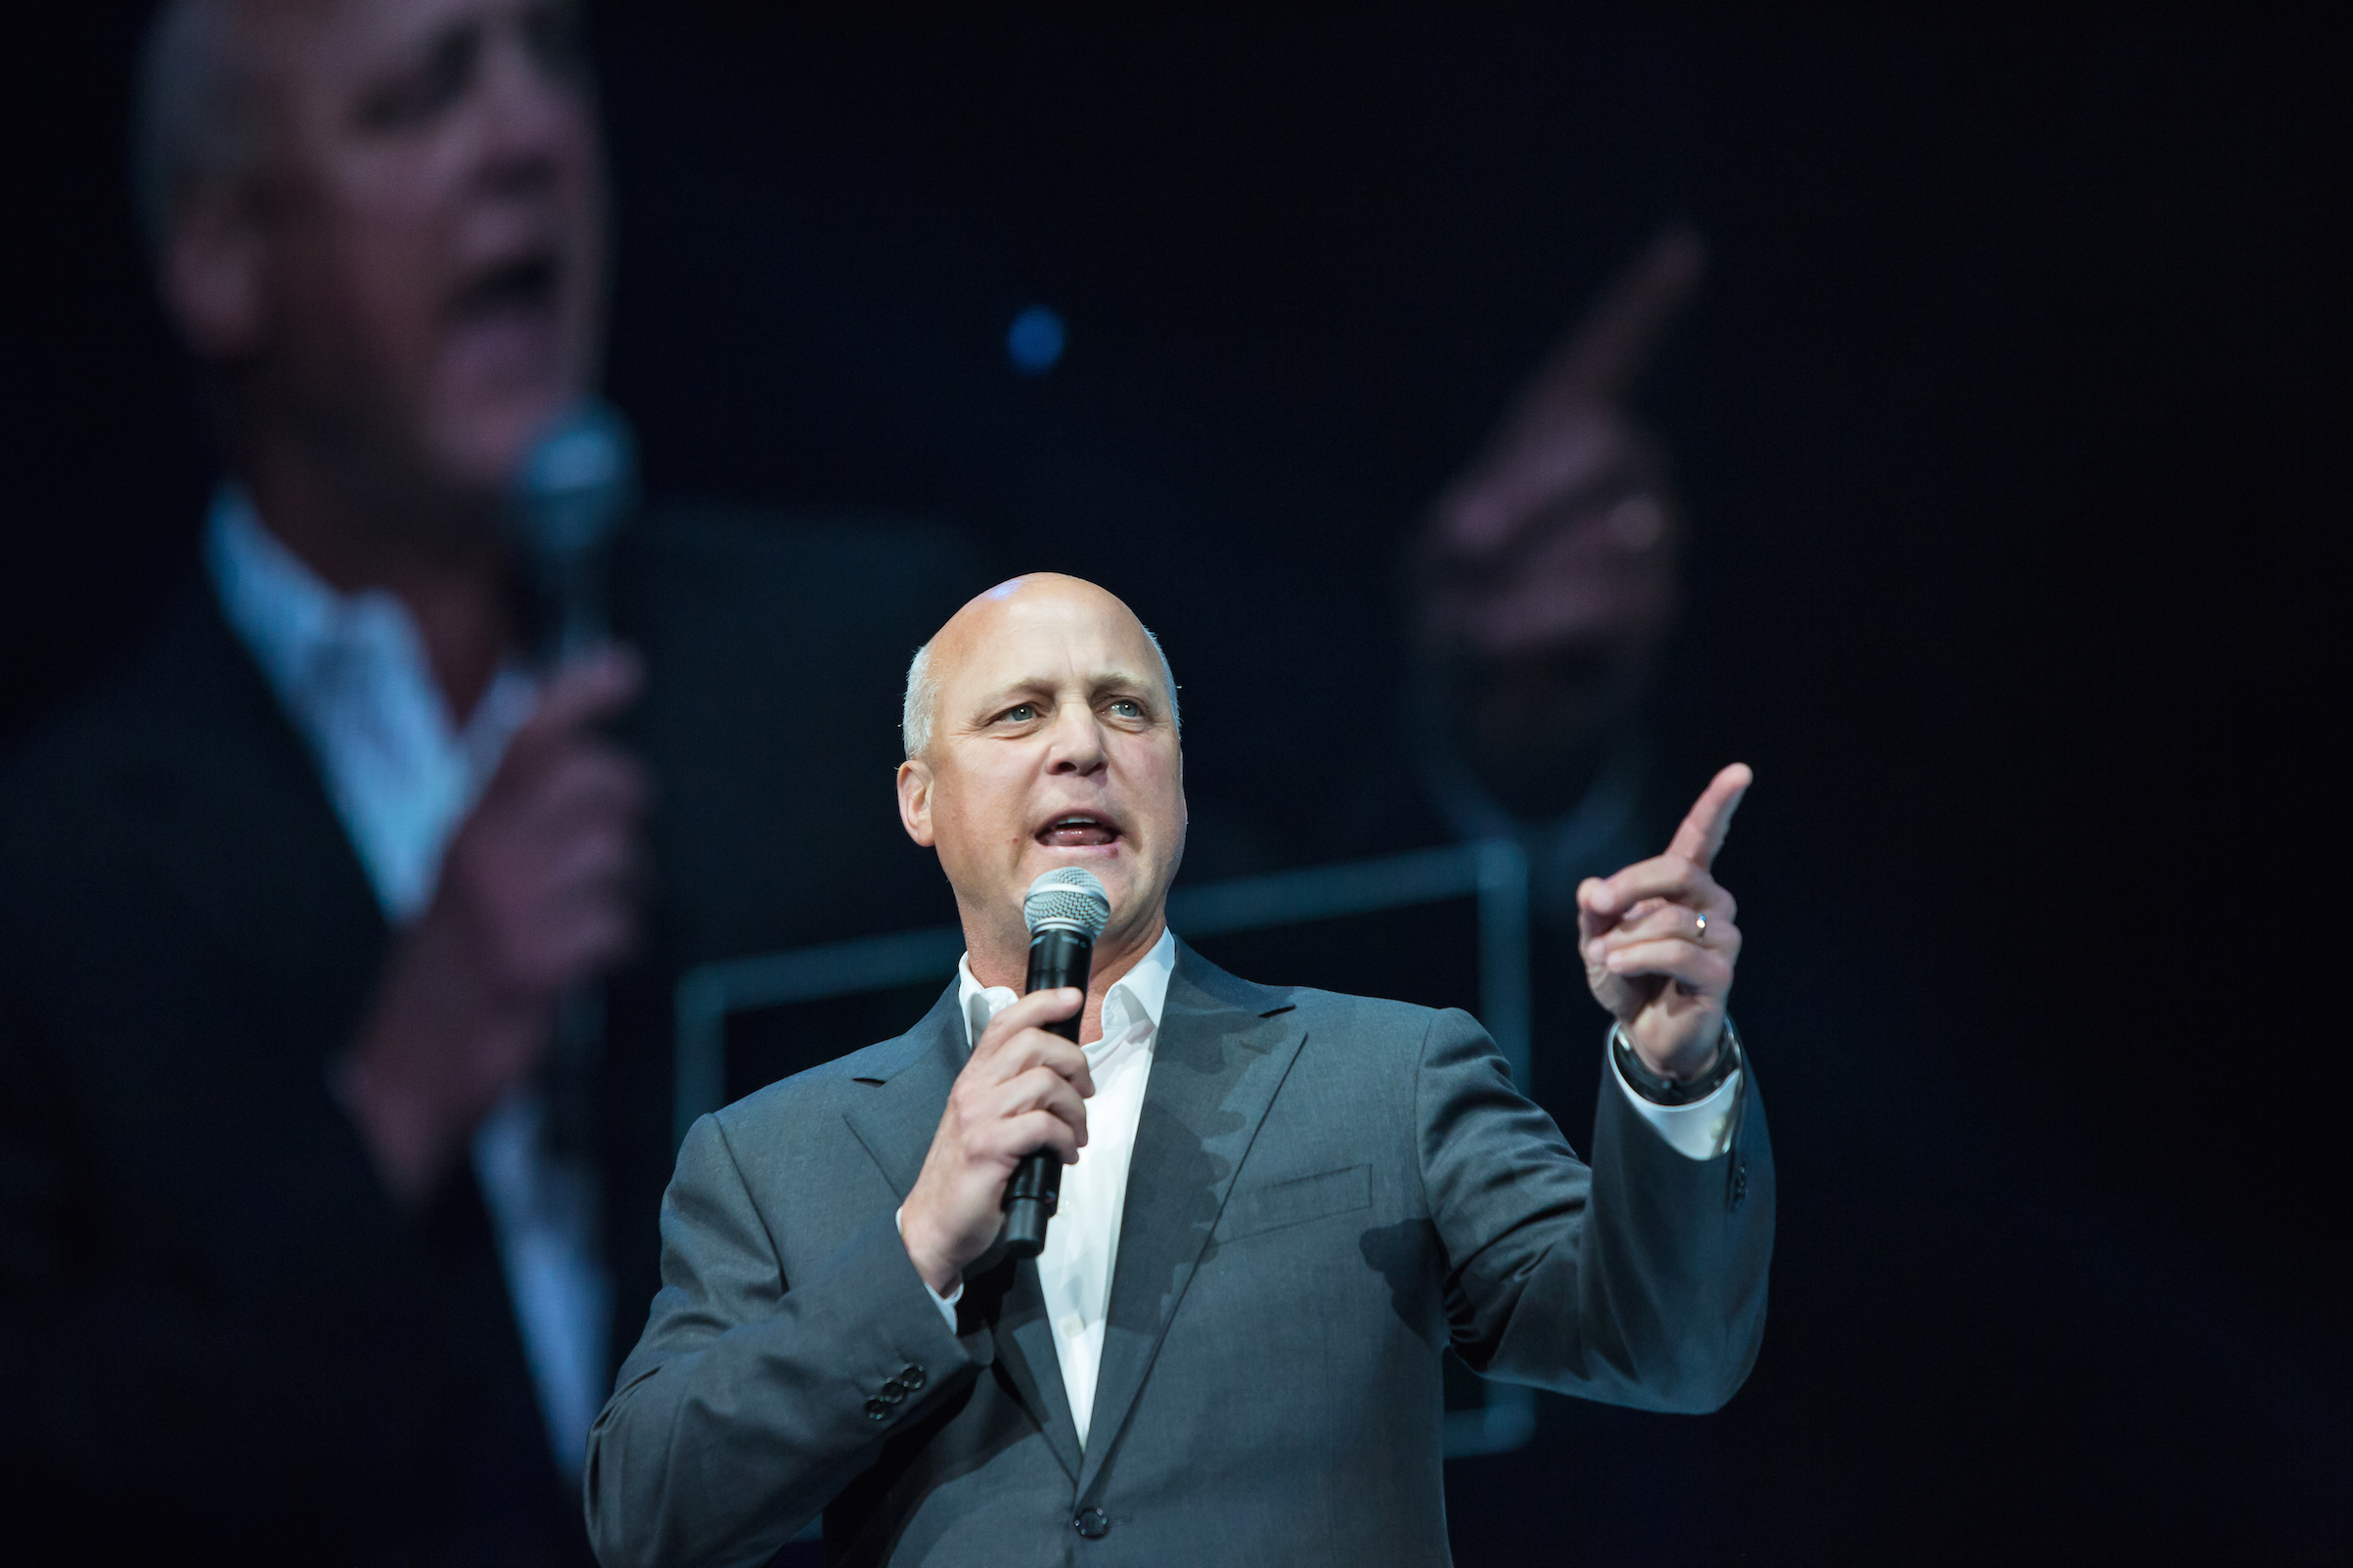 New Orleans Mayor Mitch Landrieu addresses a crowd during an event marking the 10-year anniversary of Hurricane Katrina on Aug. 29, 2015, in New Orleans (Julie Dermansky—Corbis / Getty Images)